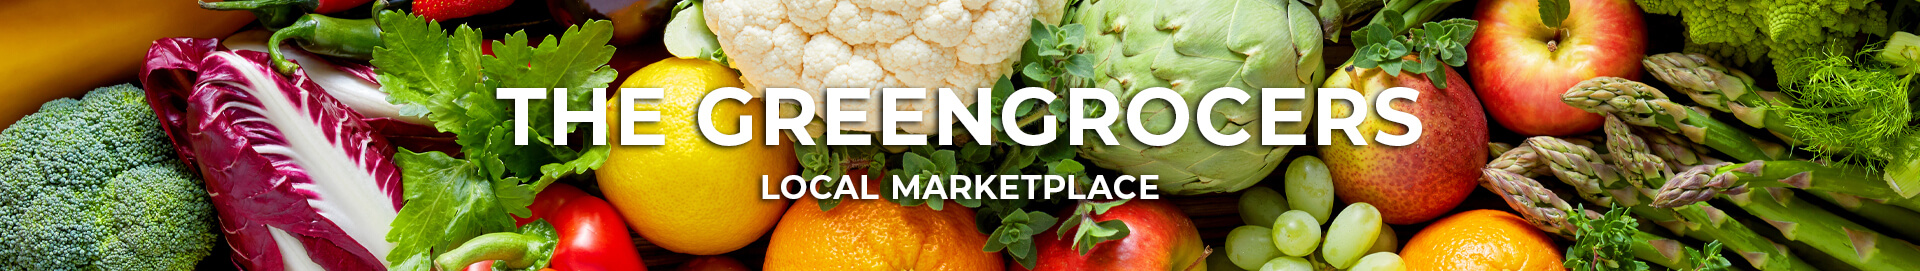 The Greengrocers Local Marketplace